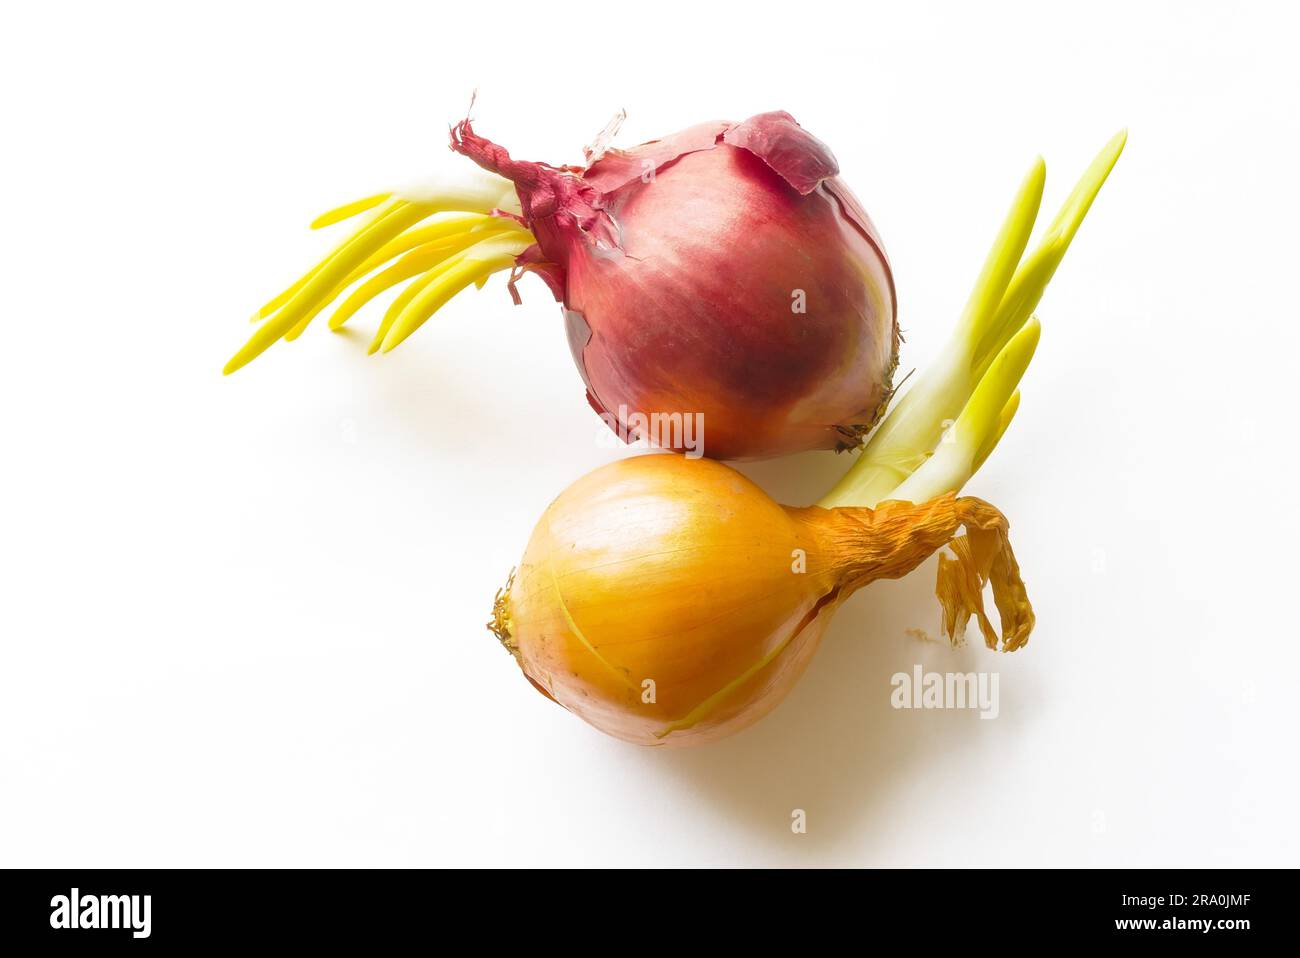 A red and a yellow onion with green sprout Stock Photo